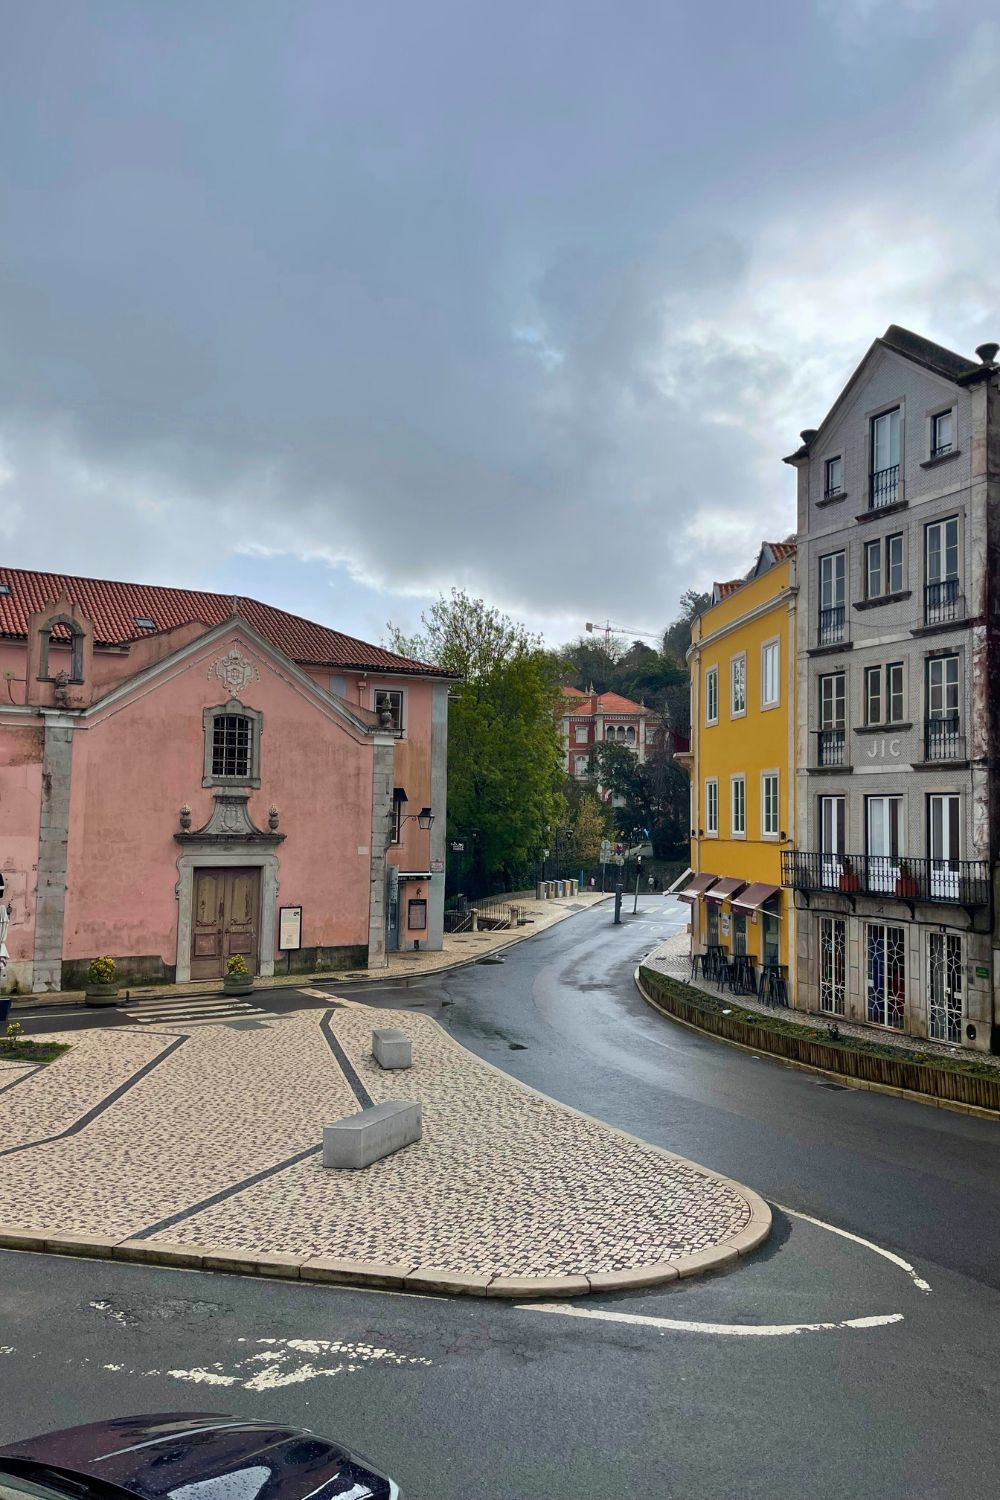 A quiet street in Sintra curves between colorful buildings, including a pastel pink structure with baroque architectural details and a bright yellow building with a cafe on the ground floor. The cobblestone road glistens slightly from recent rain, enhancing the quaint charm of this historic town